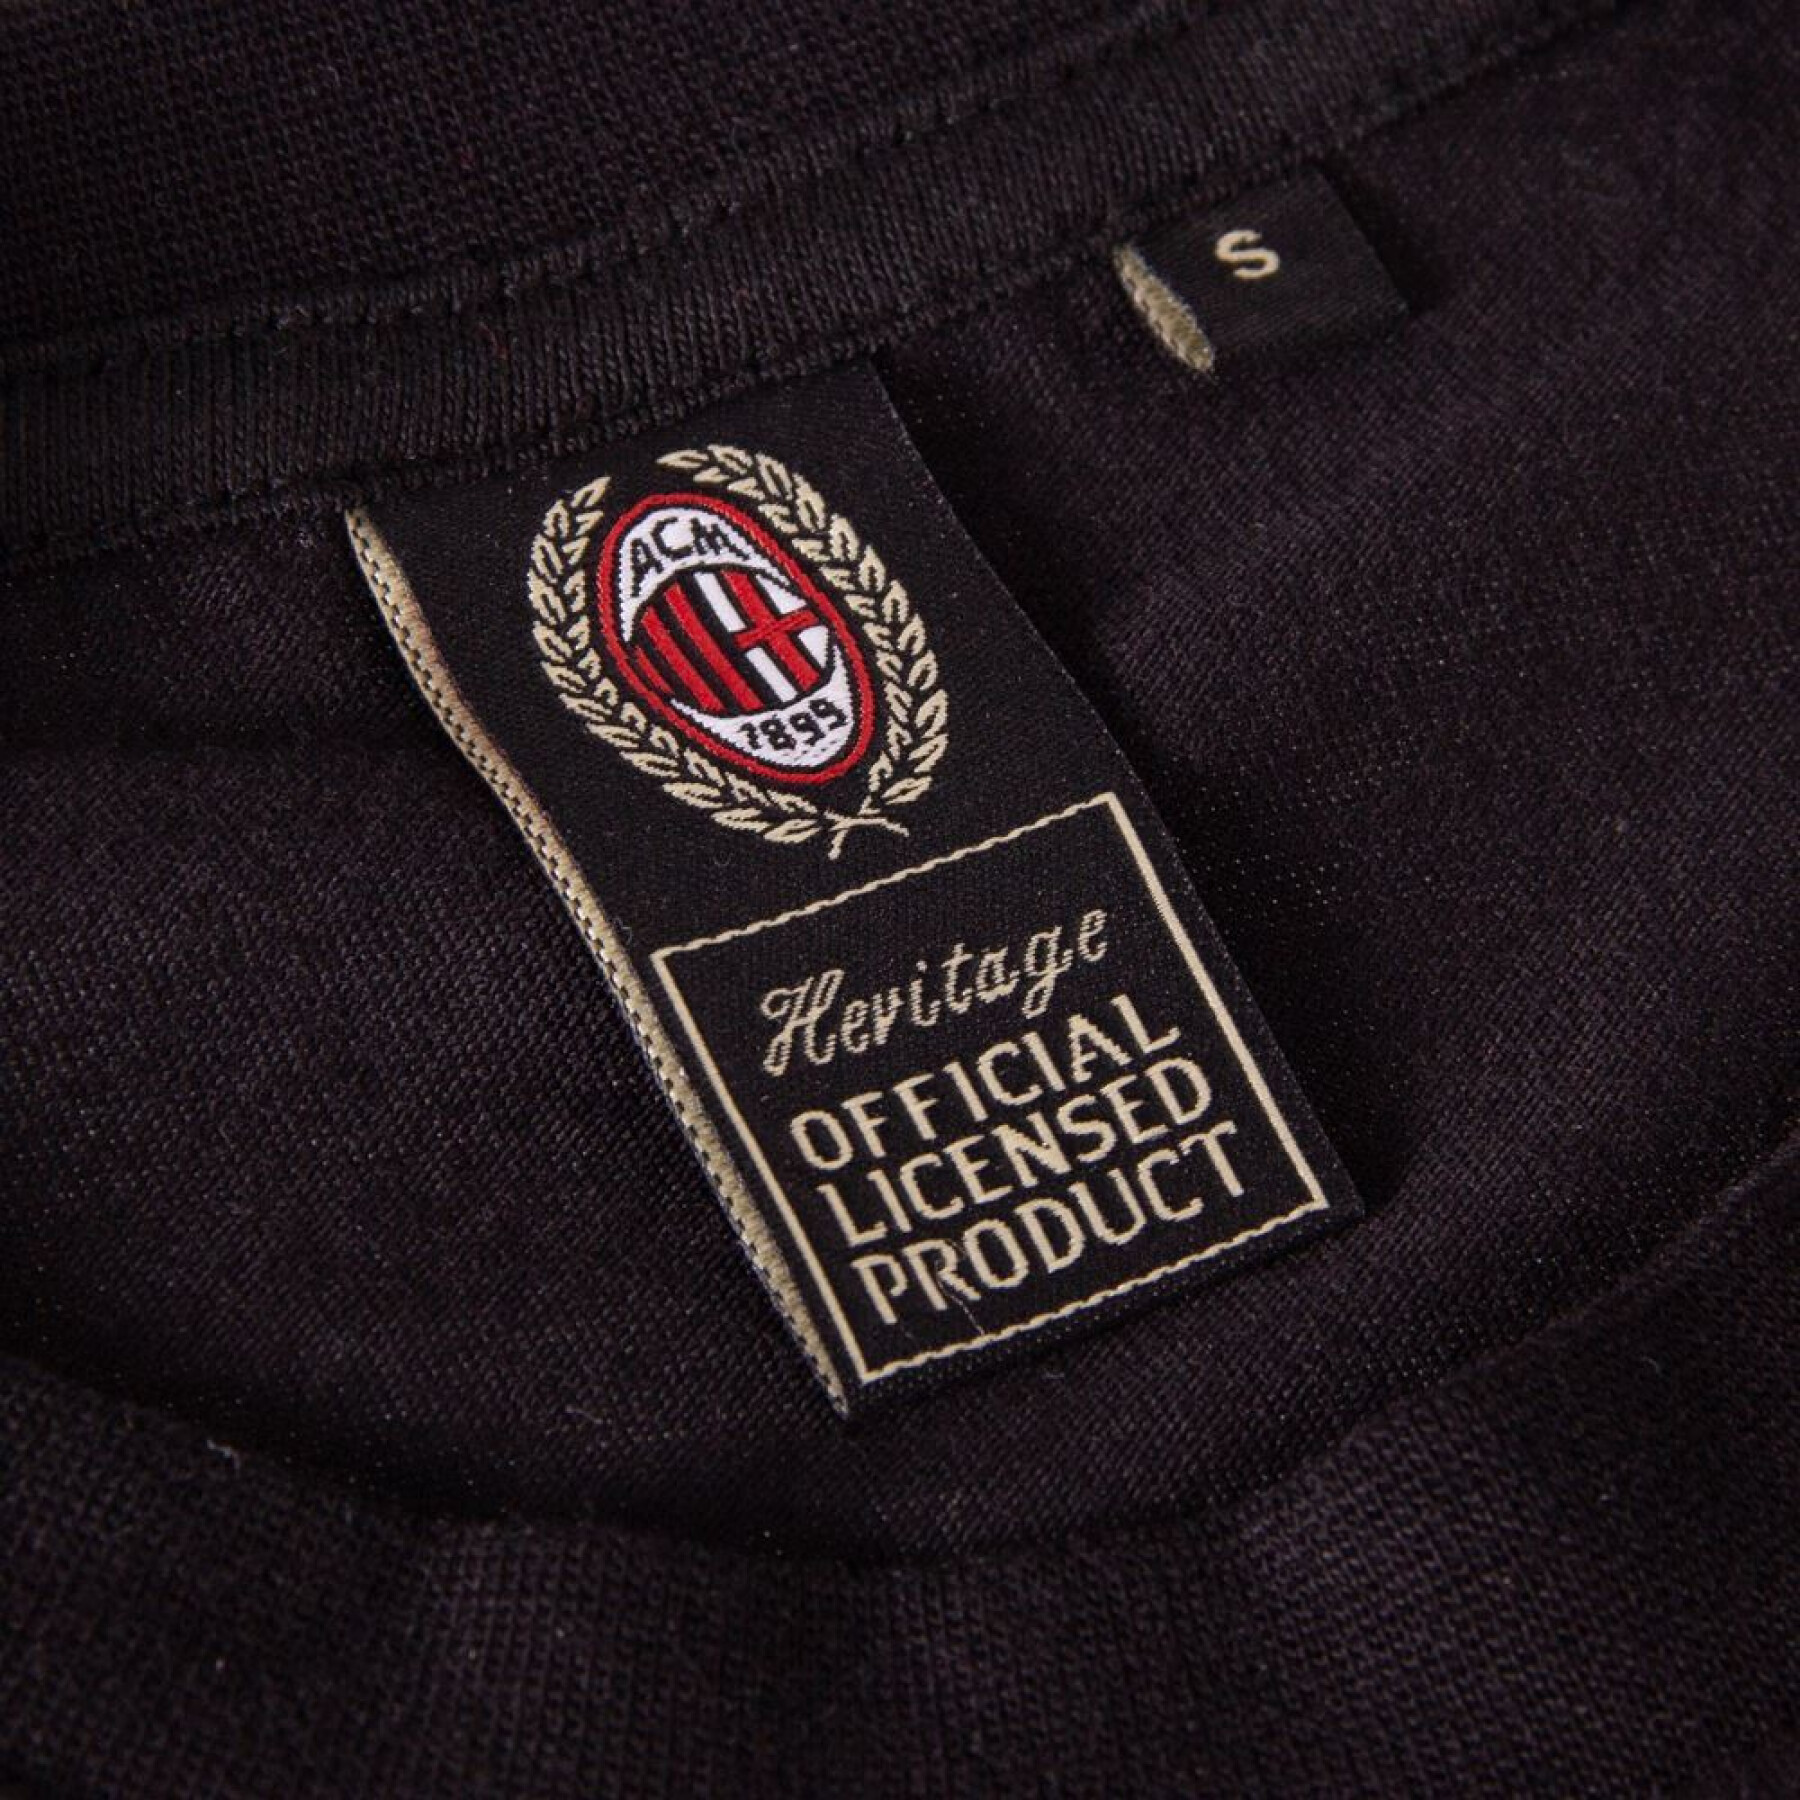 Embroidered T-shirt Milan AC CL 2003/04